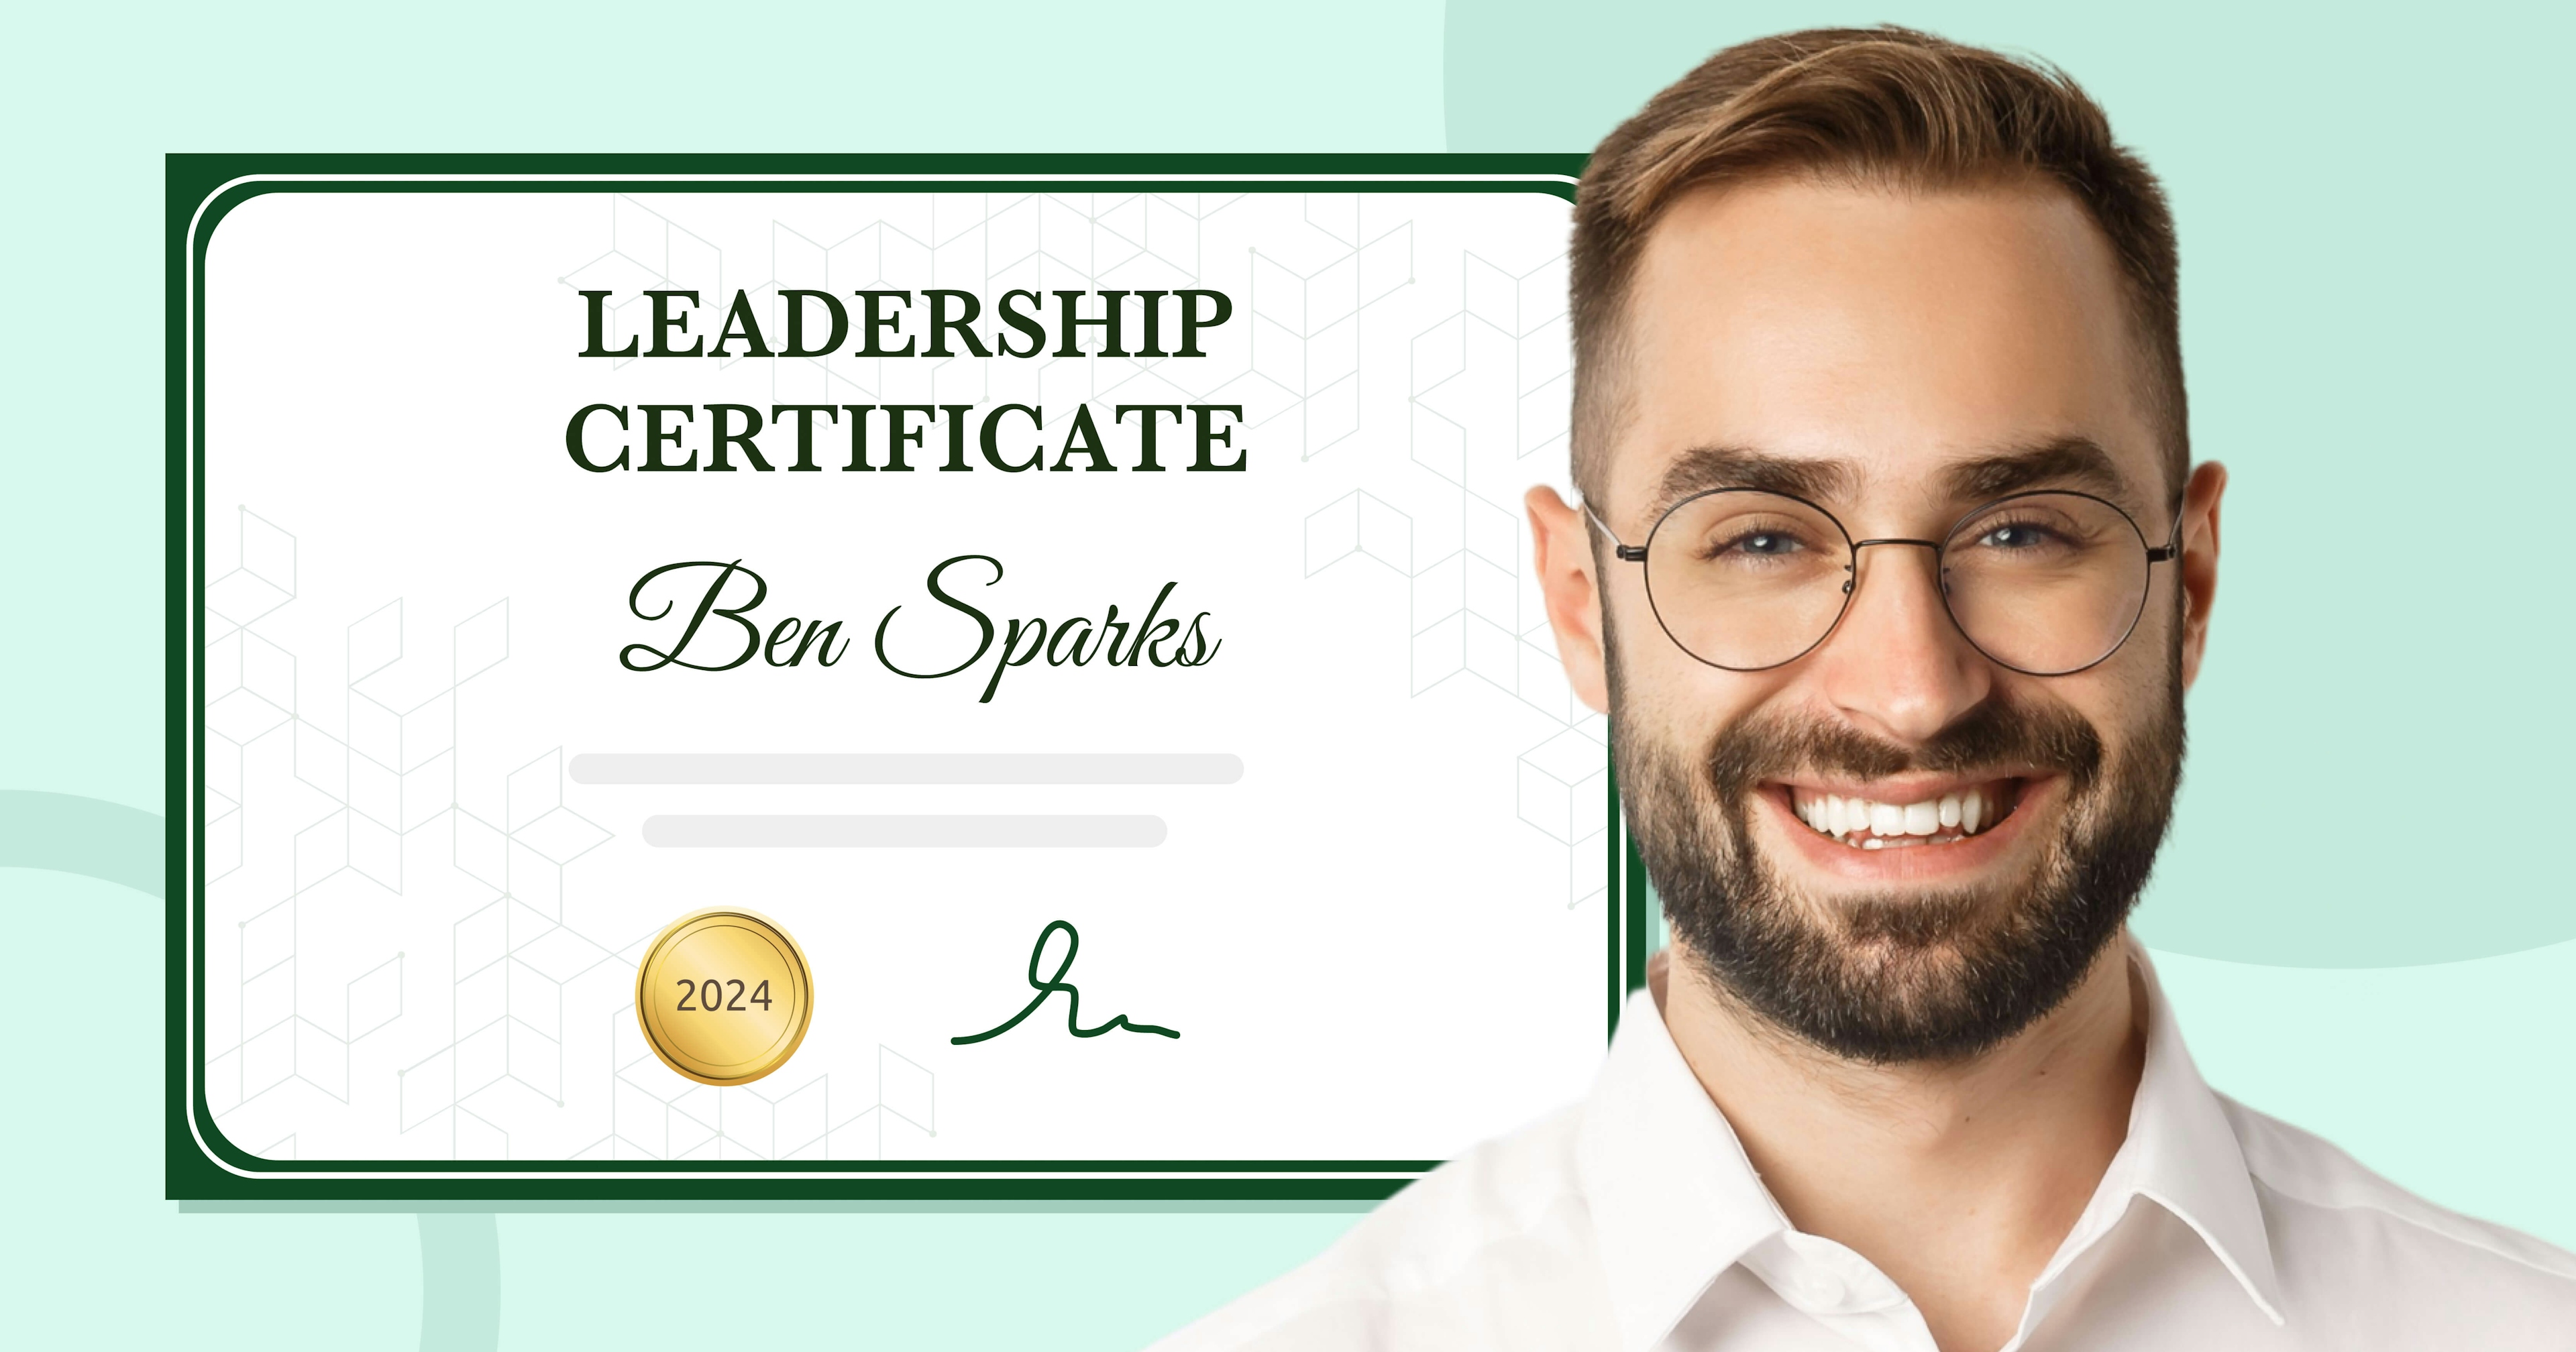 15 Leadership Certificates Templates cover image